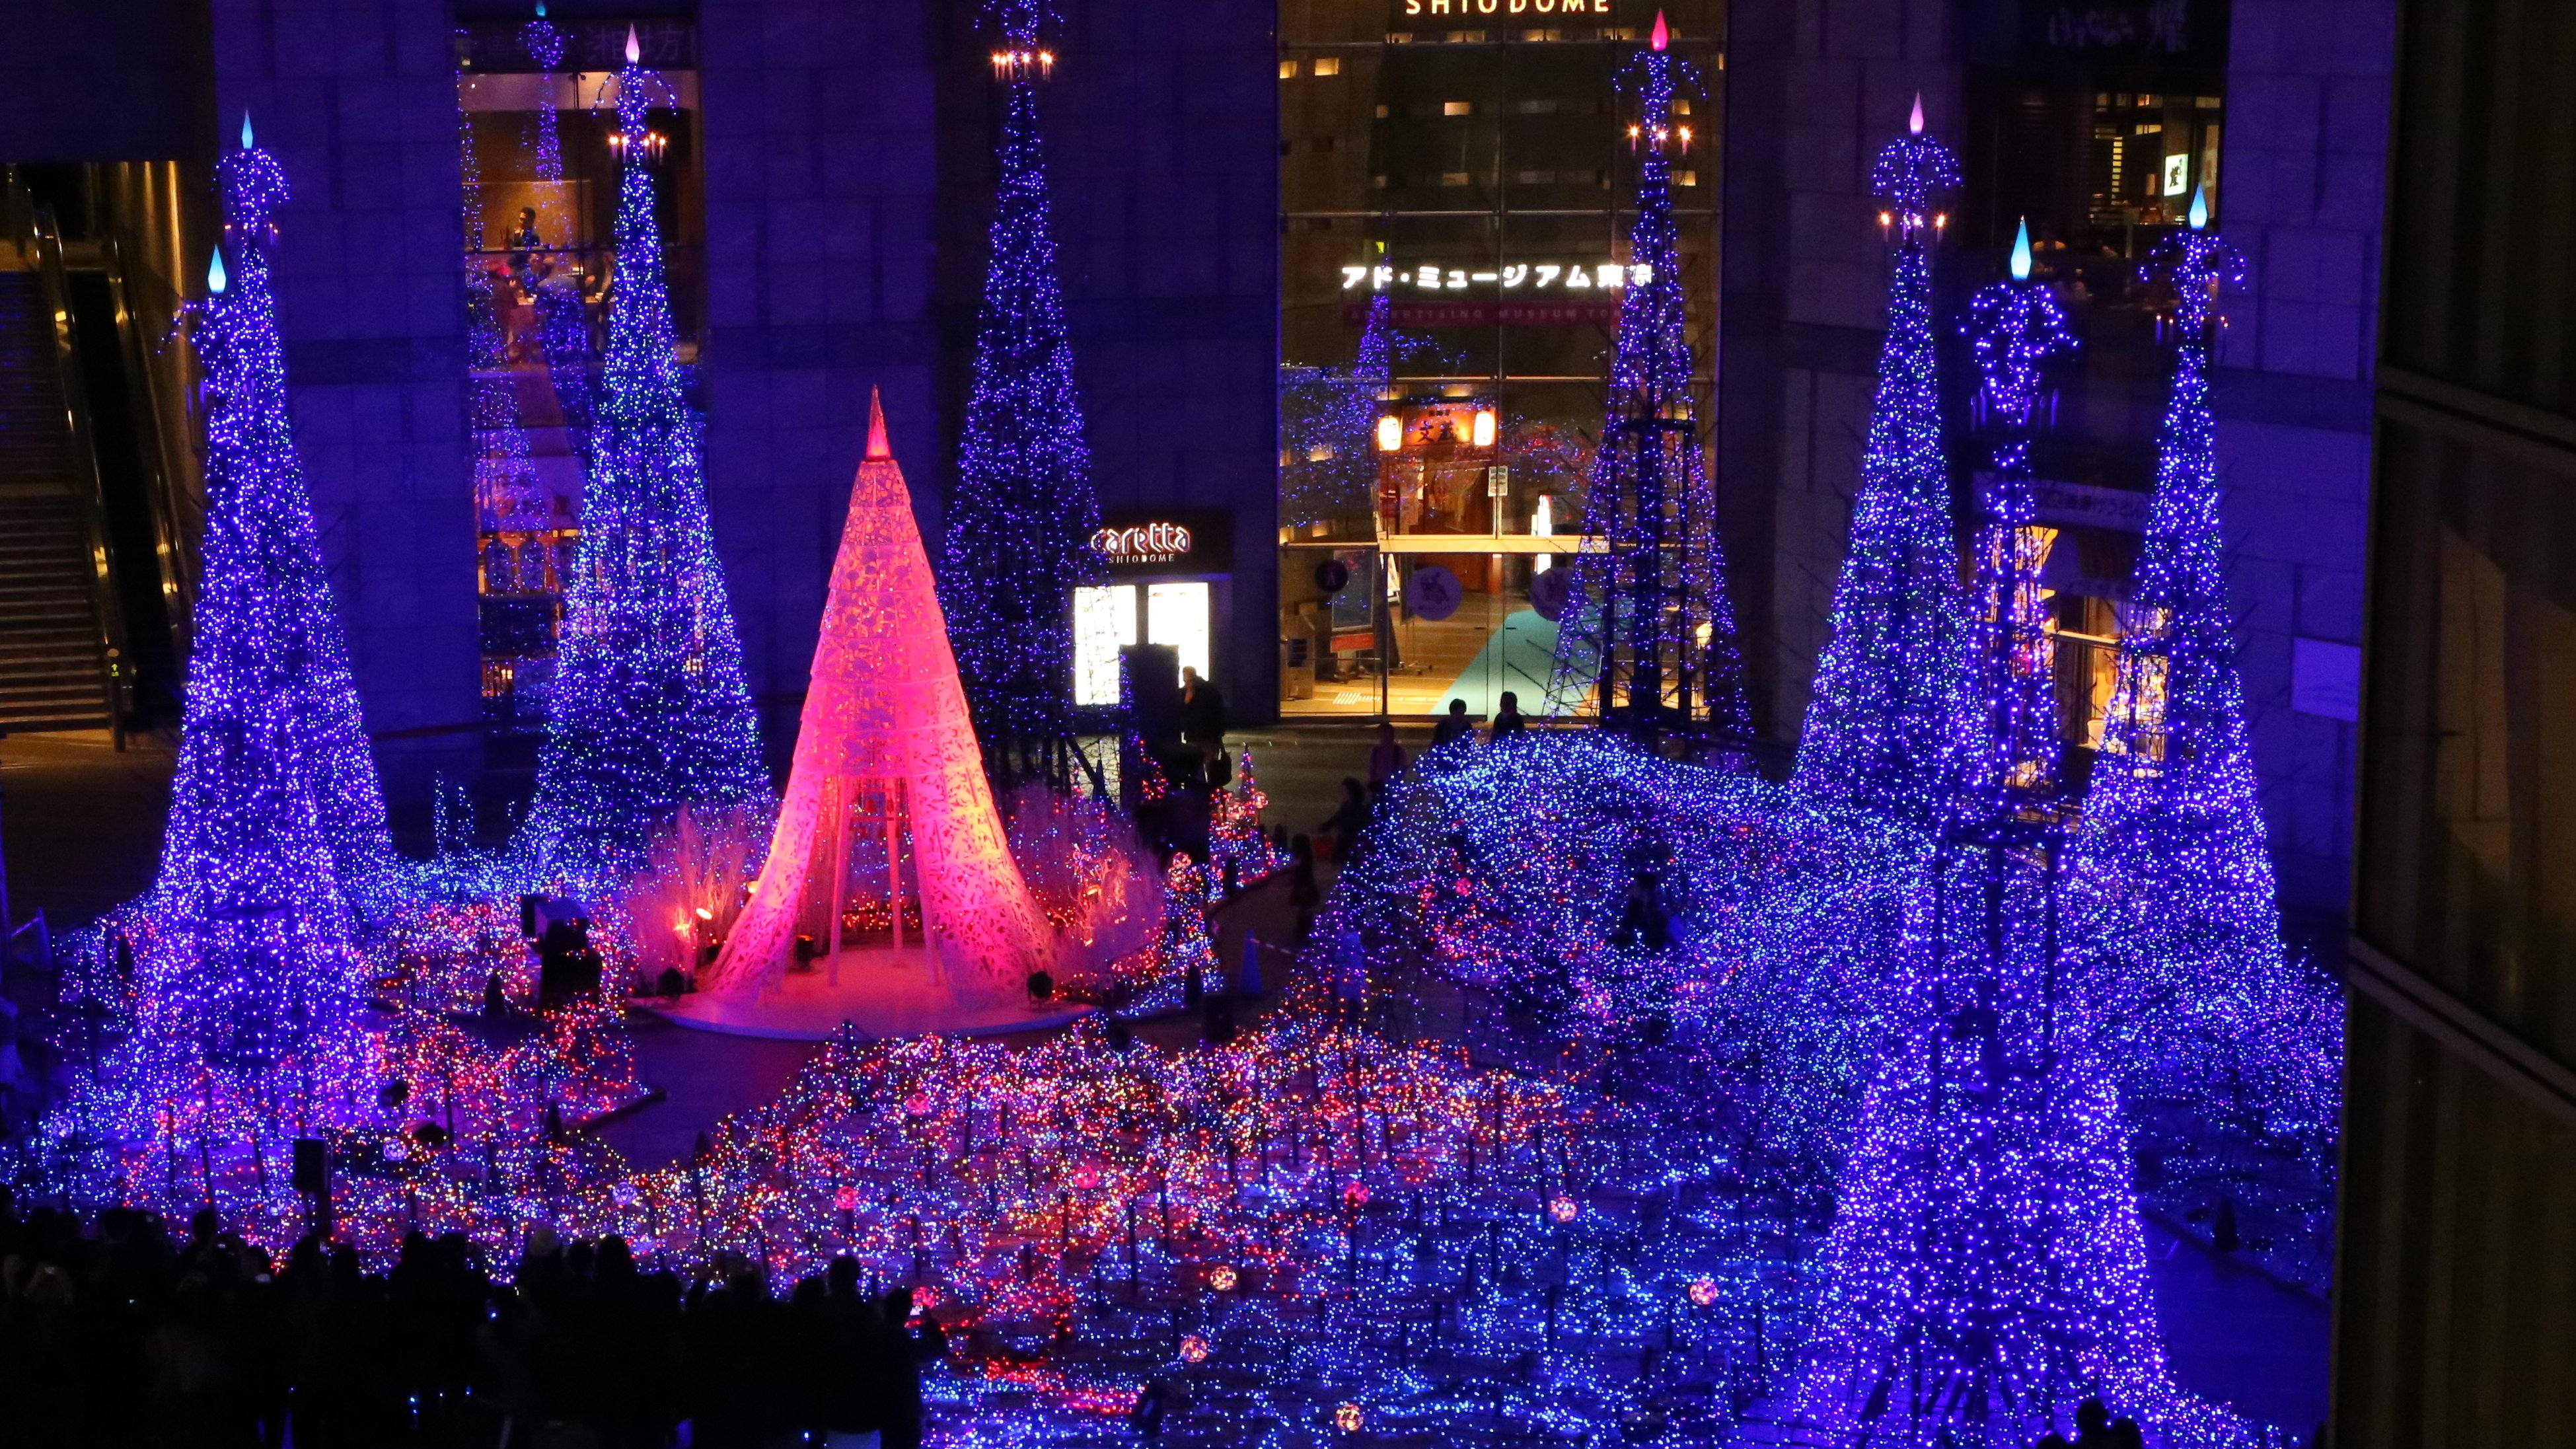 Japan Consulate Ny 総領事館 𝑨 𝒇𝒆𝒔𝒕𝒊𝒗𝒂𝒍 𝒐𝒇 𝒍𝒊𝒈𝒉𝒕𝒔 During The Holiday Season Winter Illumination Events Light Up The Tokyo Cityscape Spanning 400 Meters And 700 000 Led Lights The Roppongi Hills Christmas